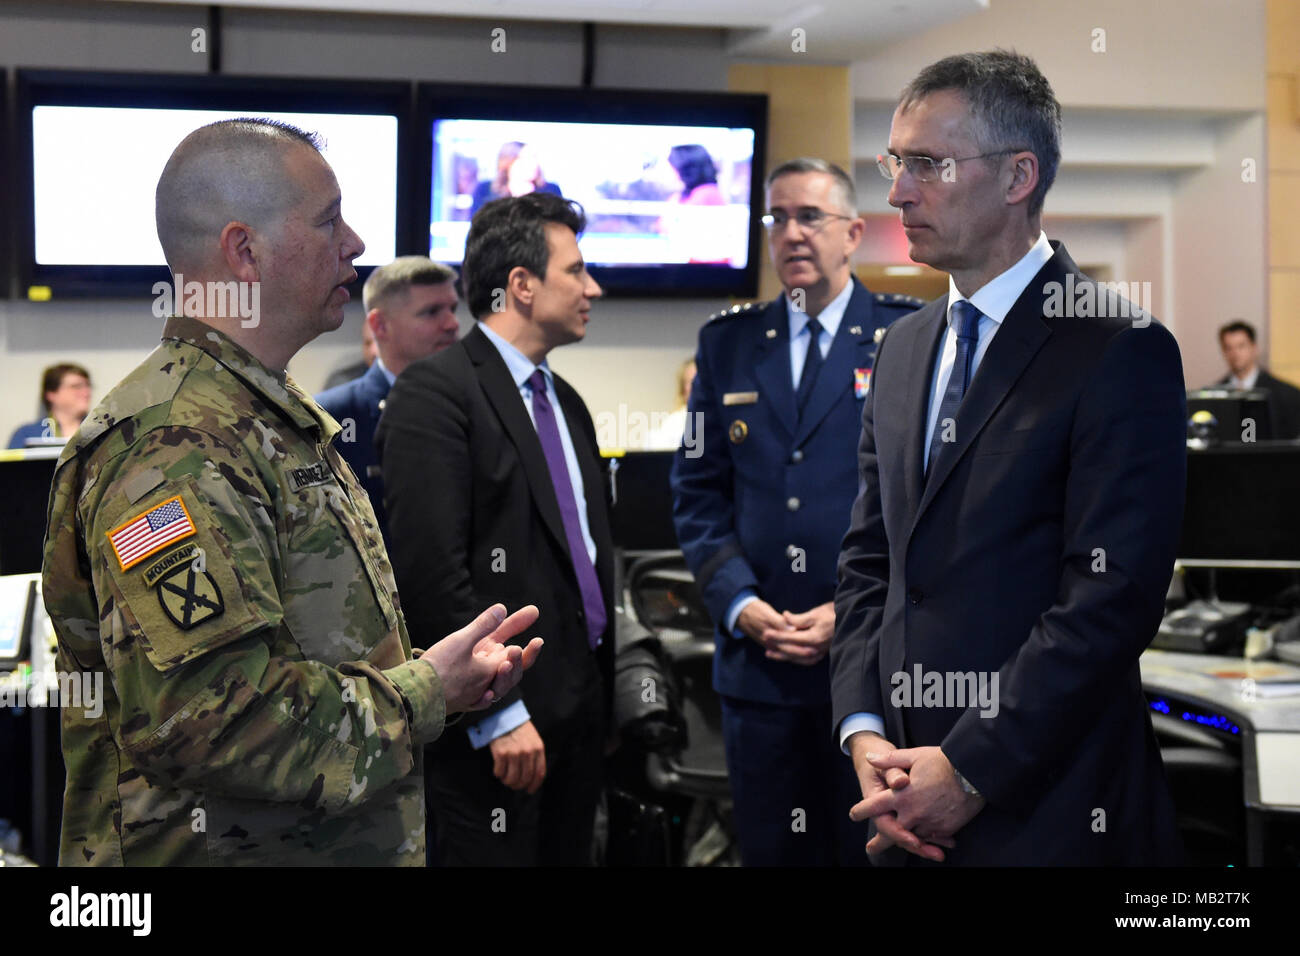 NATO Secretary General Jens Stoltenberg receives a brief from U.S. Army Col. Ray Hernandez, battle watch commander, during a tour of U.S. Strategic Command’s (USSTRATCOM) global operations center (GOC) at Offutt Air Force Base, Neb., April 6, 2018.  During his visit, Stoltenberg toured the command’s GOC and participated in discussions with U.S. Air Force Gen. John Hyten, commander of USSTRATCOM, other senior leaders and subject matter experts on the continuing U.S. commitment to supporting NATO and allies. (U.S. Navy photo by Mass Communication Specialist 1st Class Julie R. Matyascik) Stock Photo